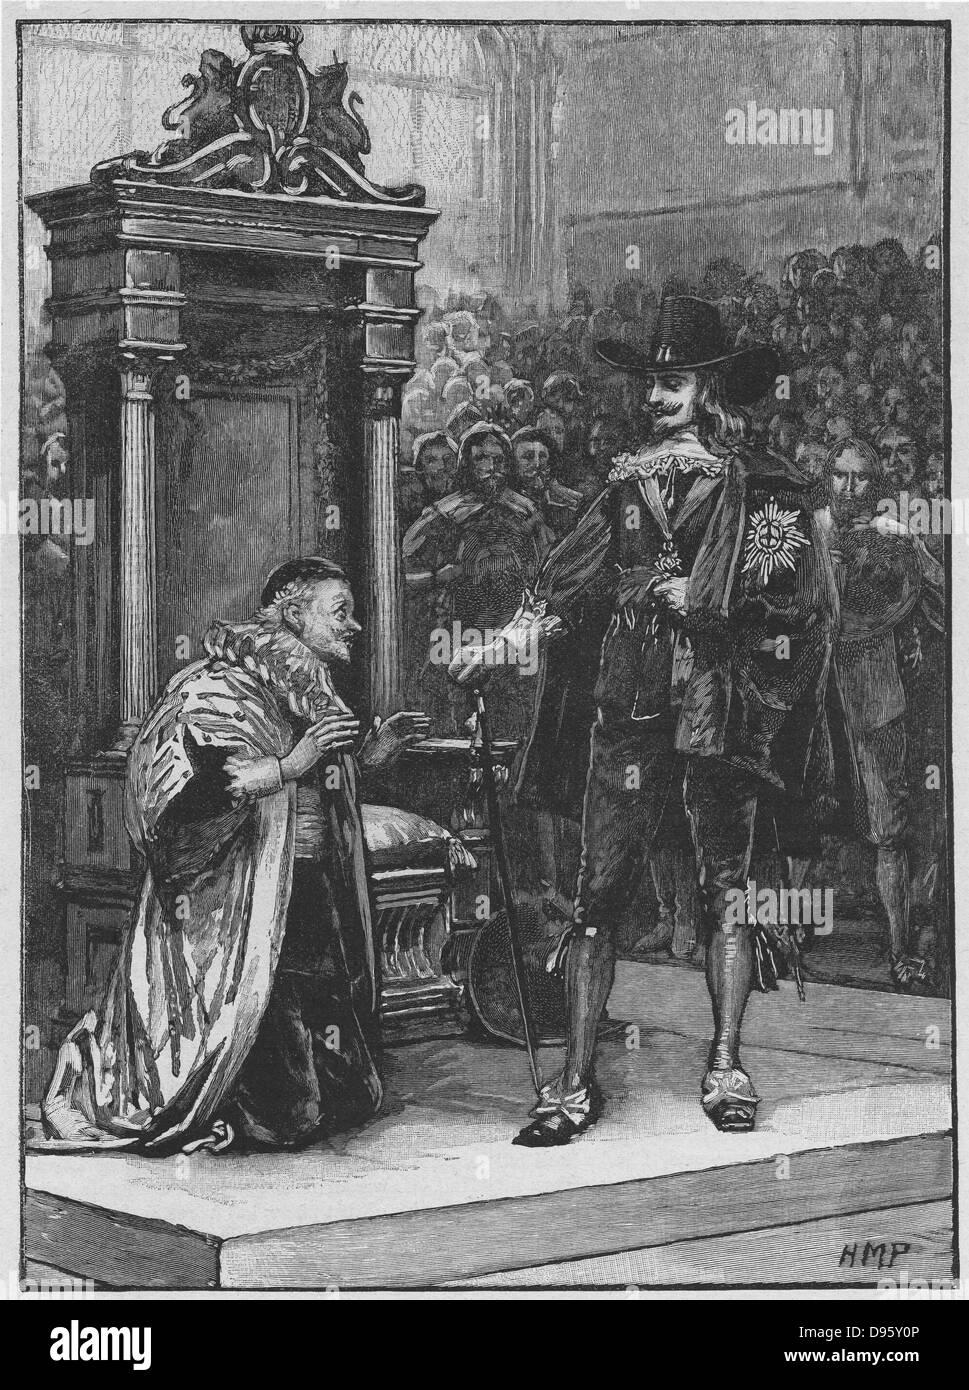 Charles I demanding the surrender of the five Members of Parliament (John Hampden, John Pym, Sir Arthur Hasilrigge, Denzil Holles and William Strode) 4 January 1642.  The Speaker, William Lenthall (1591-1662) kneels before the king  saying he has not seen the wanted man. Engraving c1885. Stock Photo